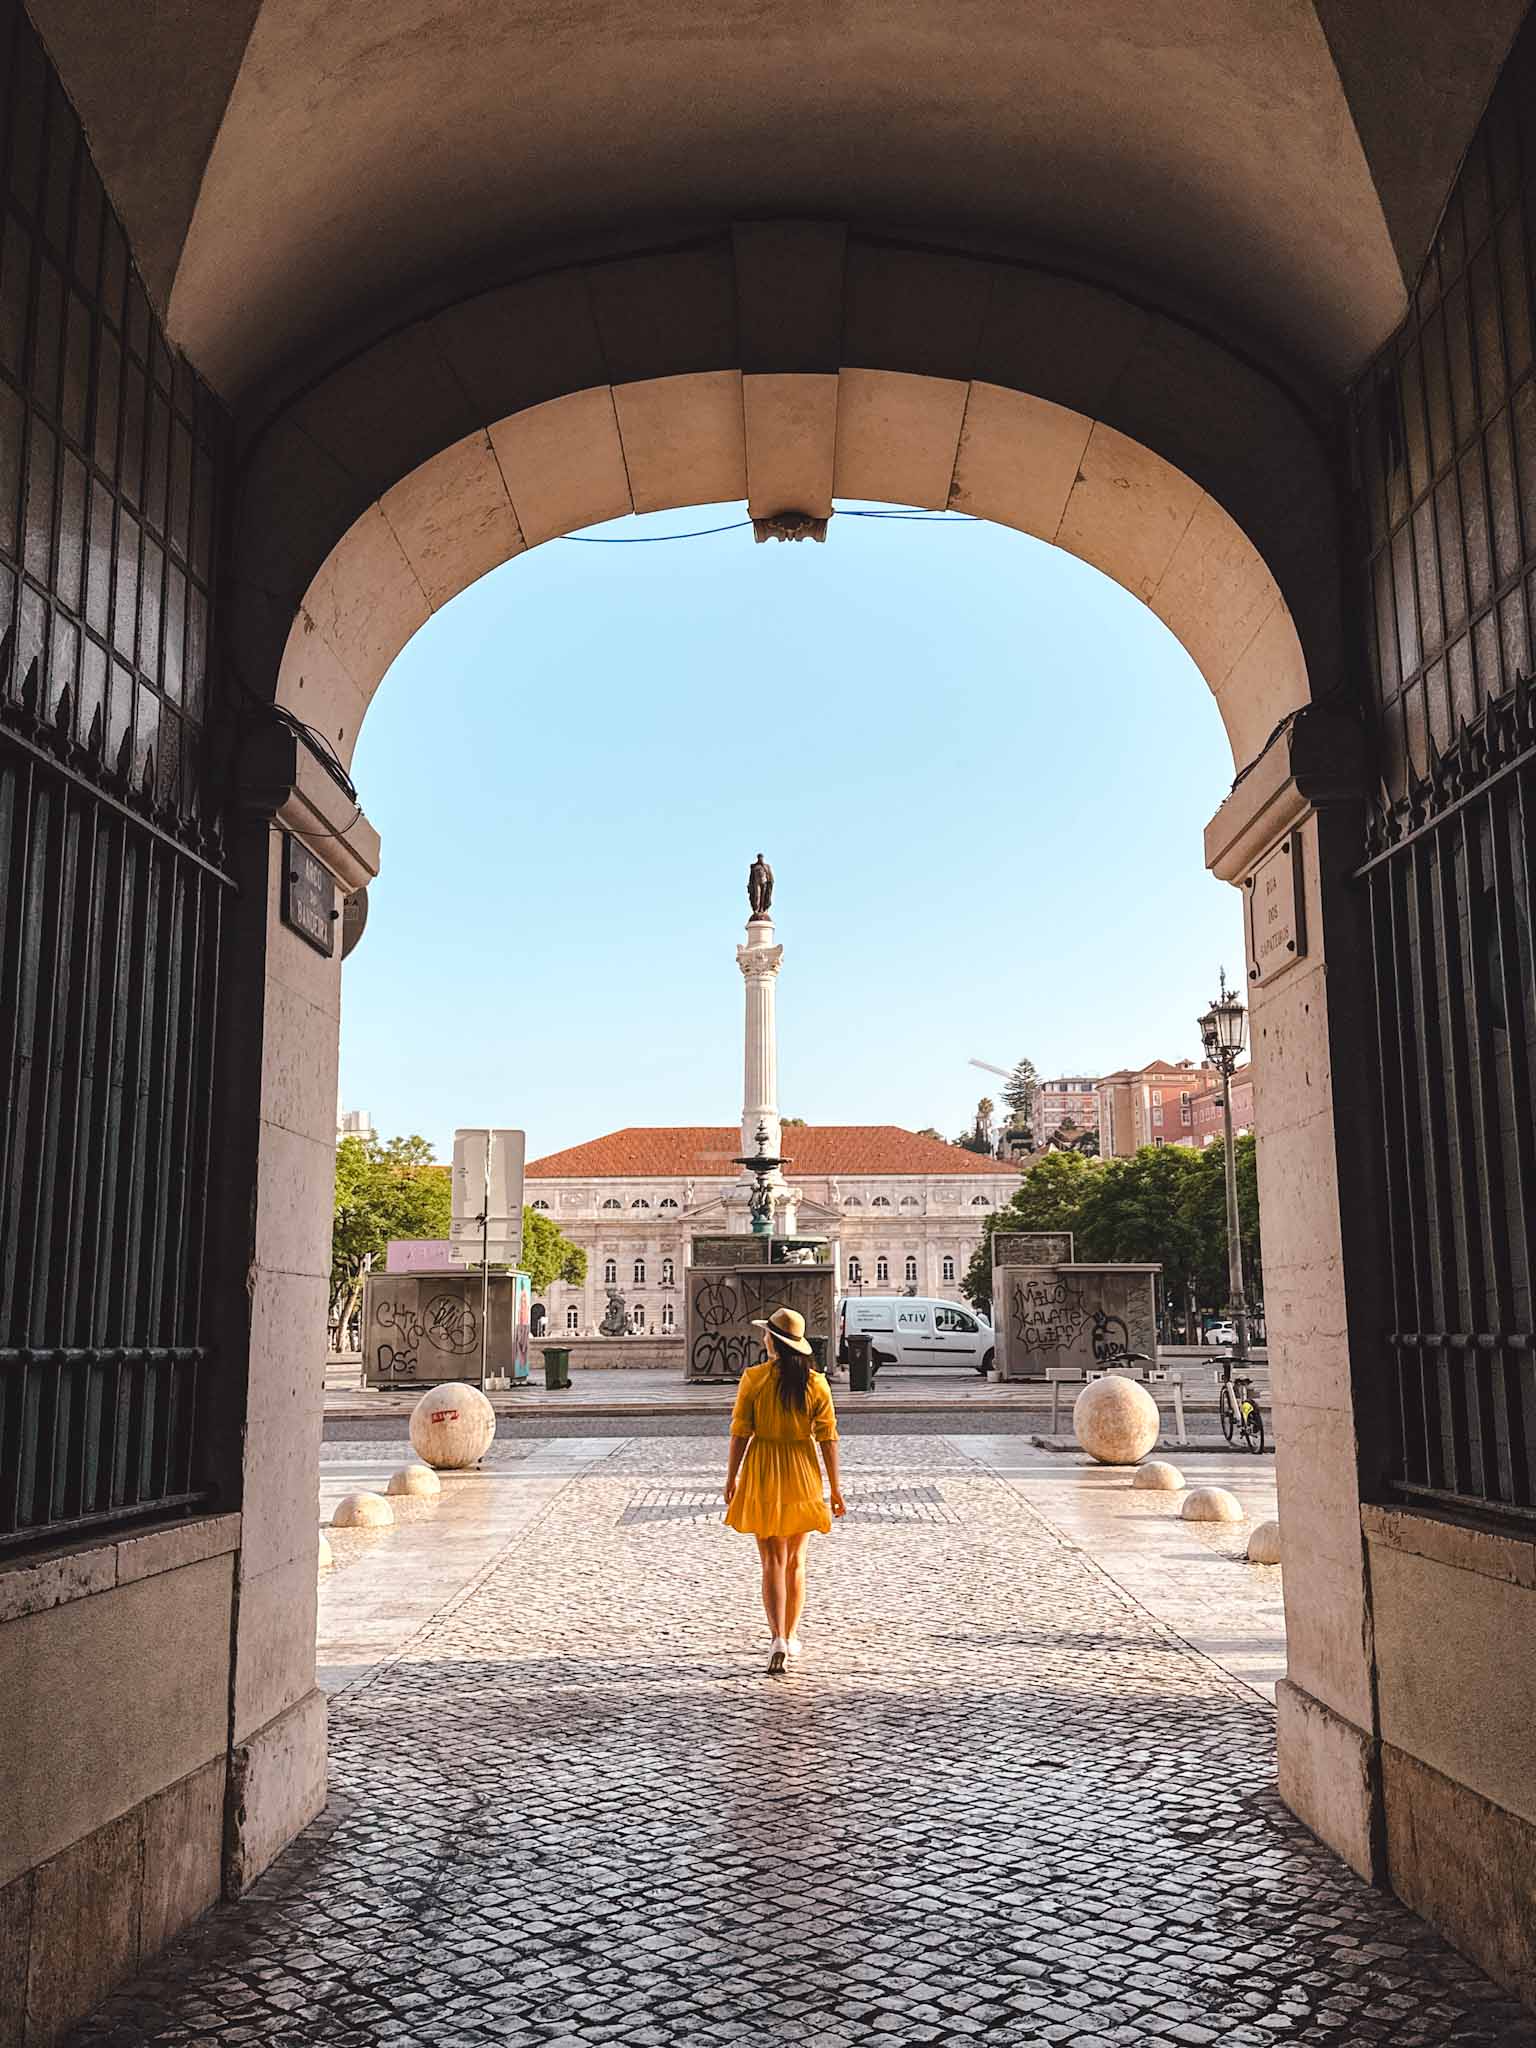 Best Instagram photo spots in Lisbon, Portugal - Arco do Bandeira and the Praça do Rossio